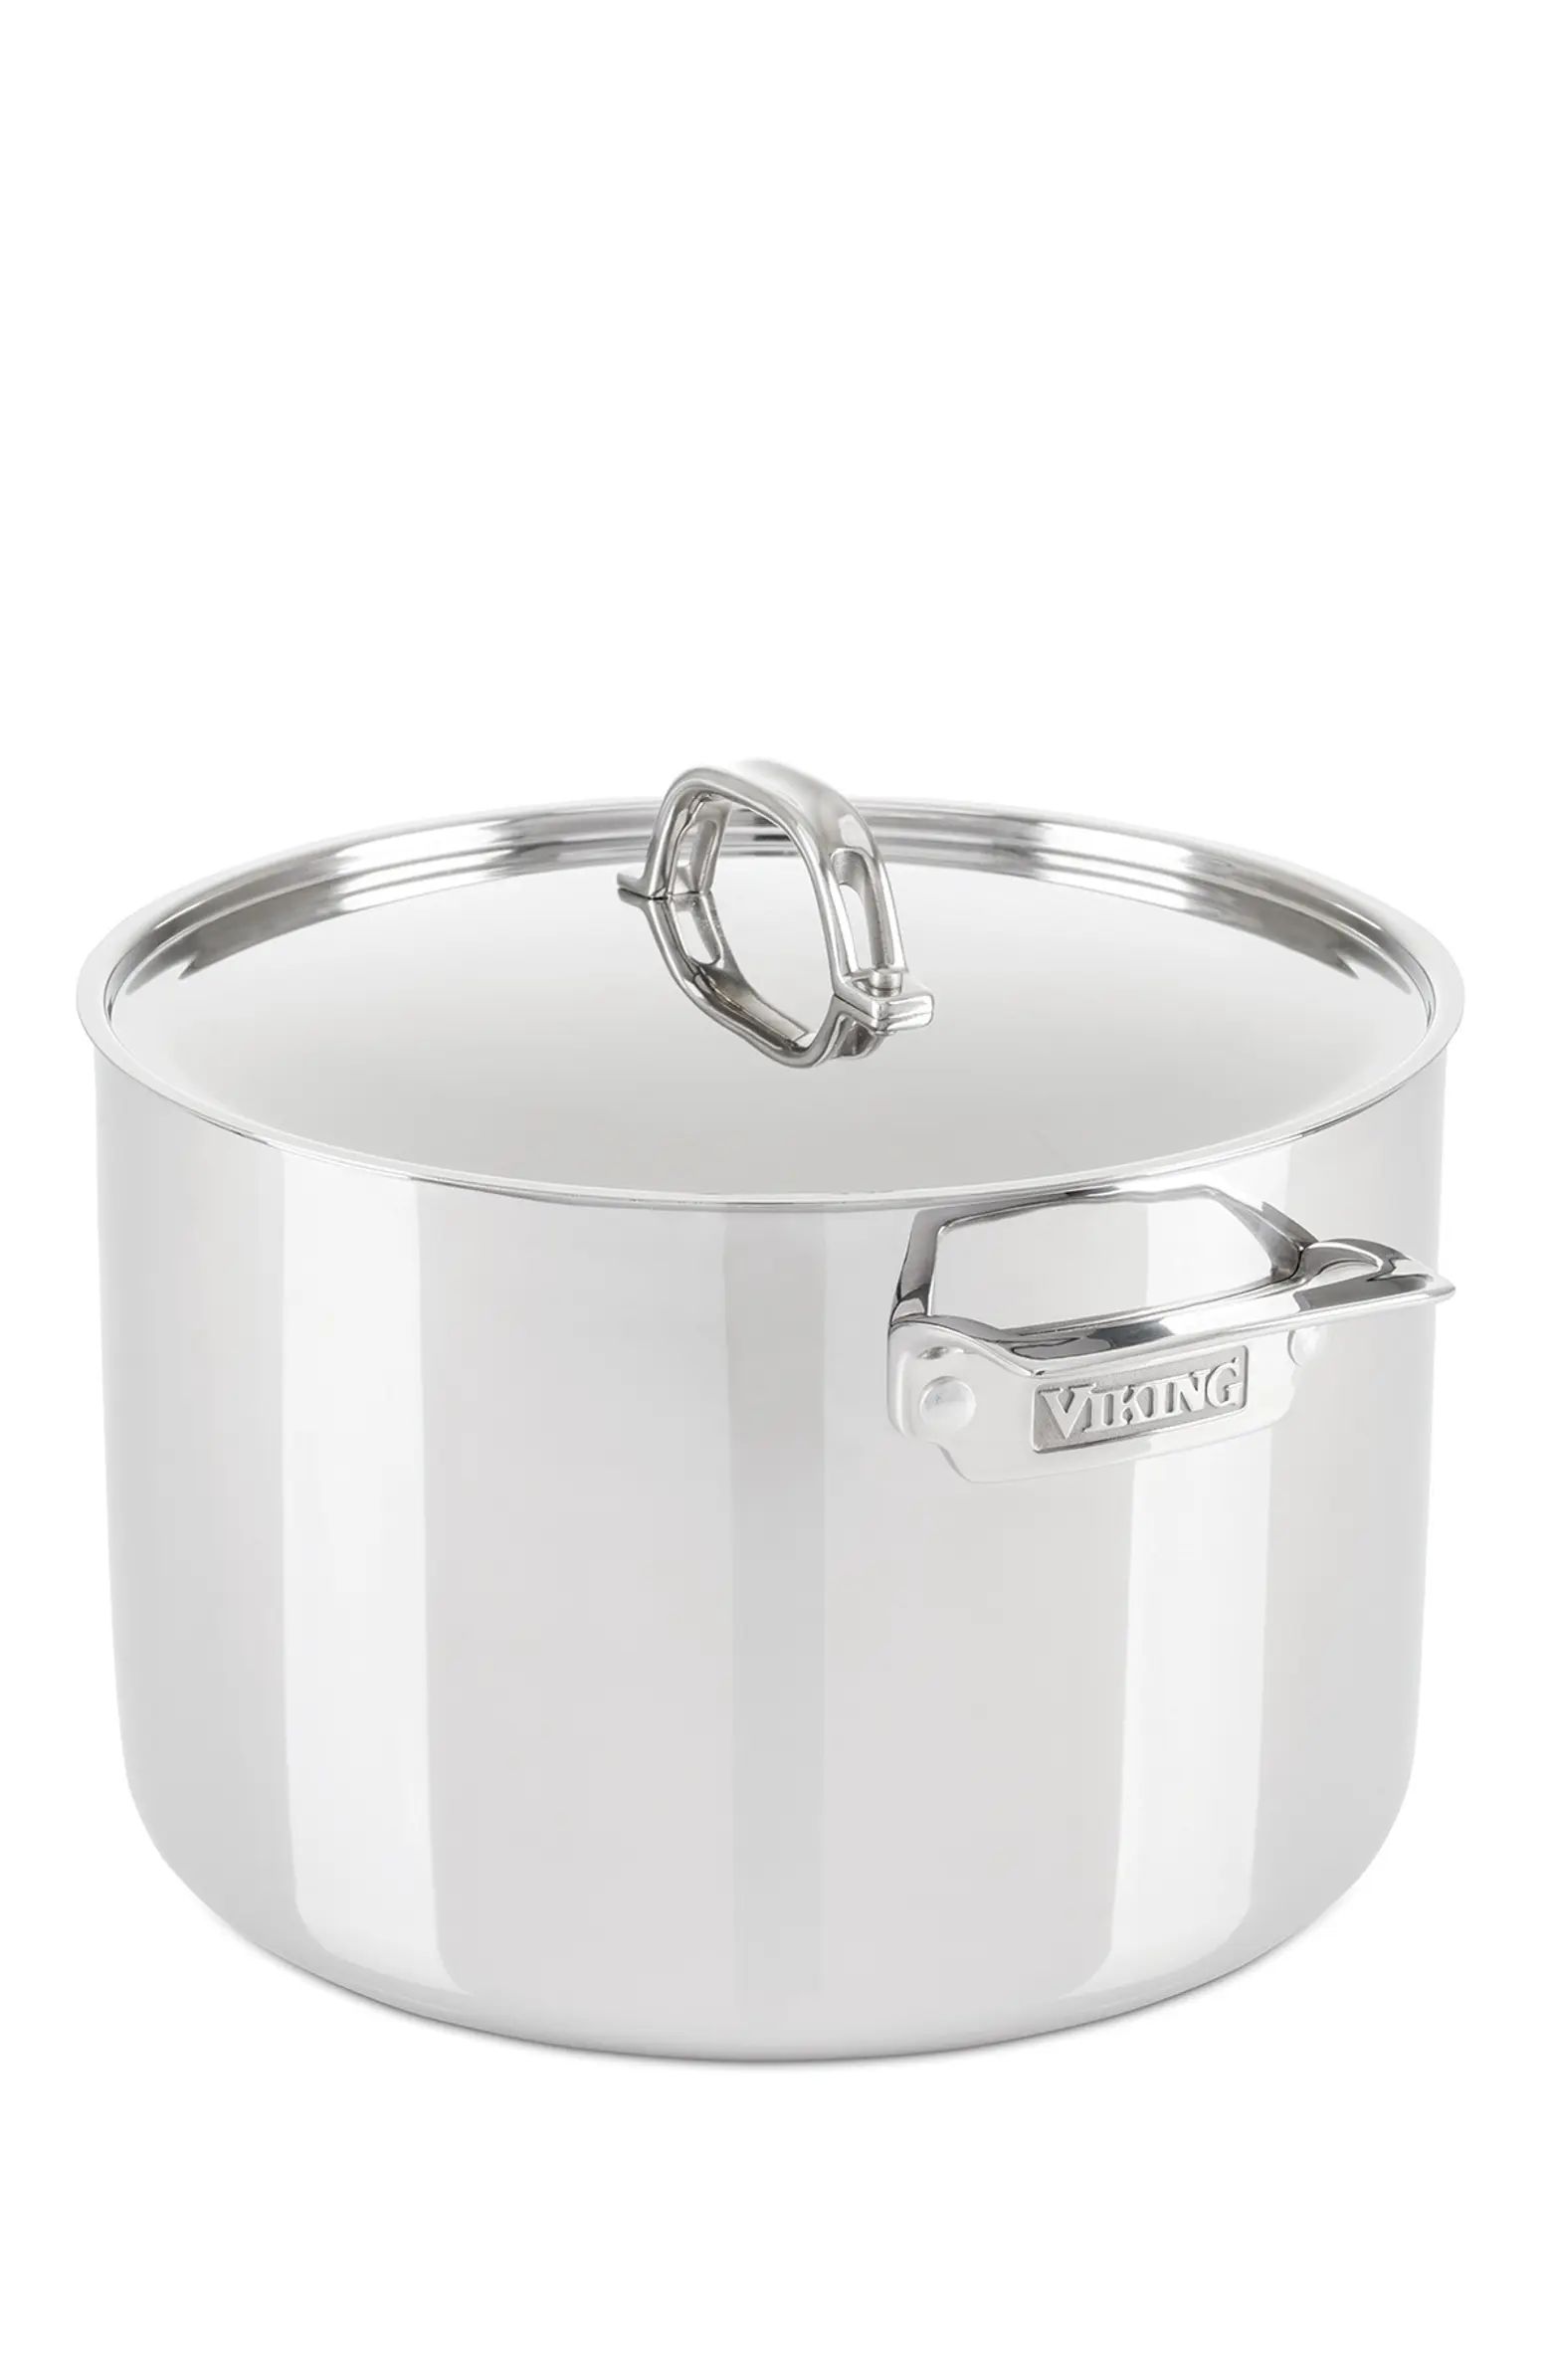 3-Ply 12 Quart Mirror Finish Stainless Steel Stock Pot with Metal Lid | Nordstrom